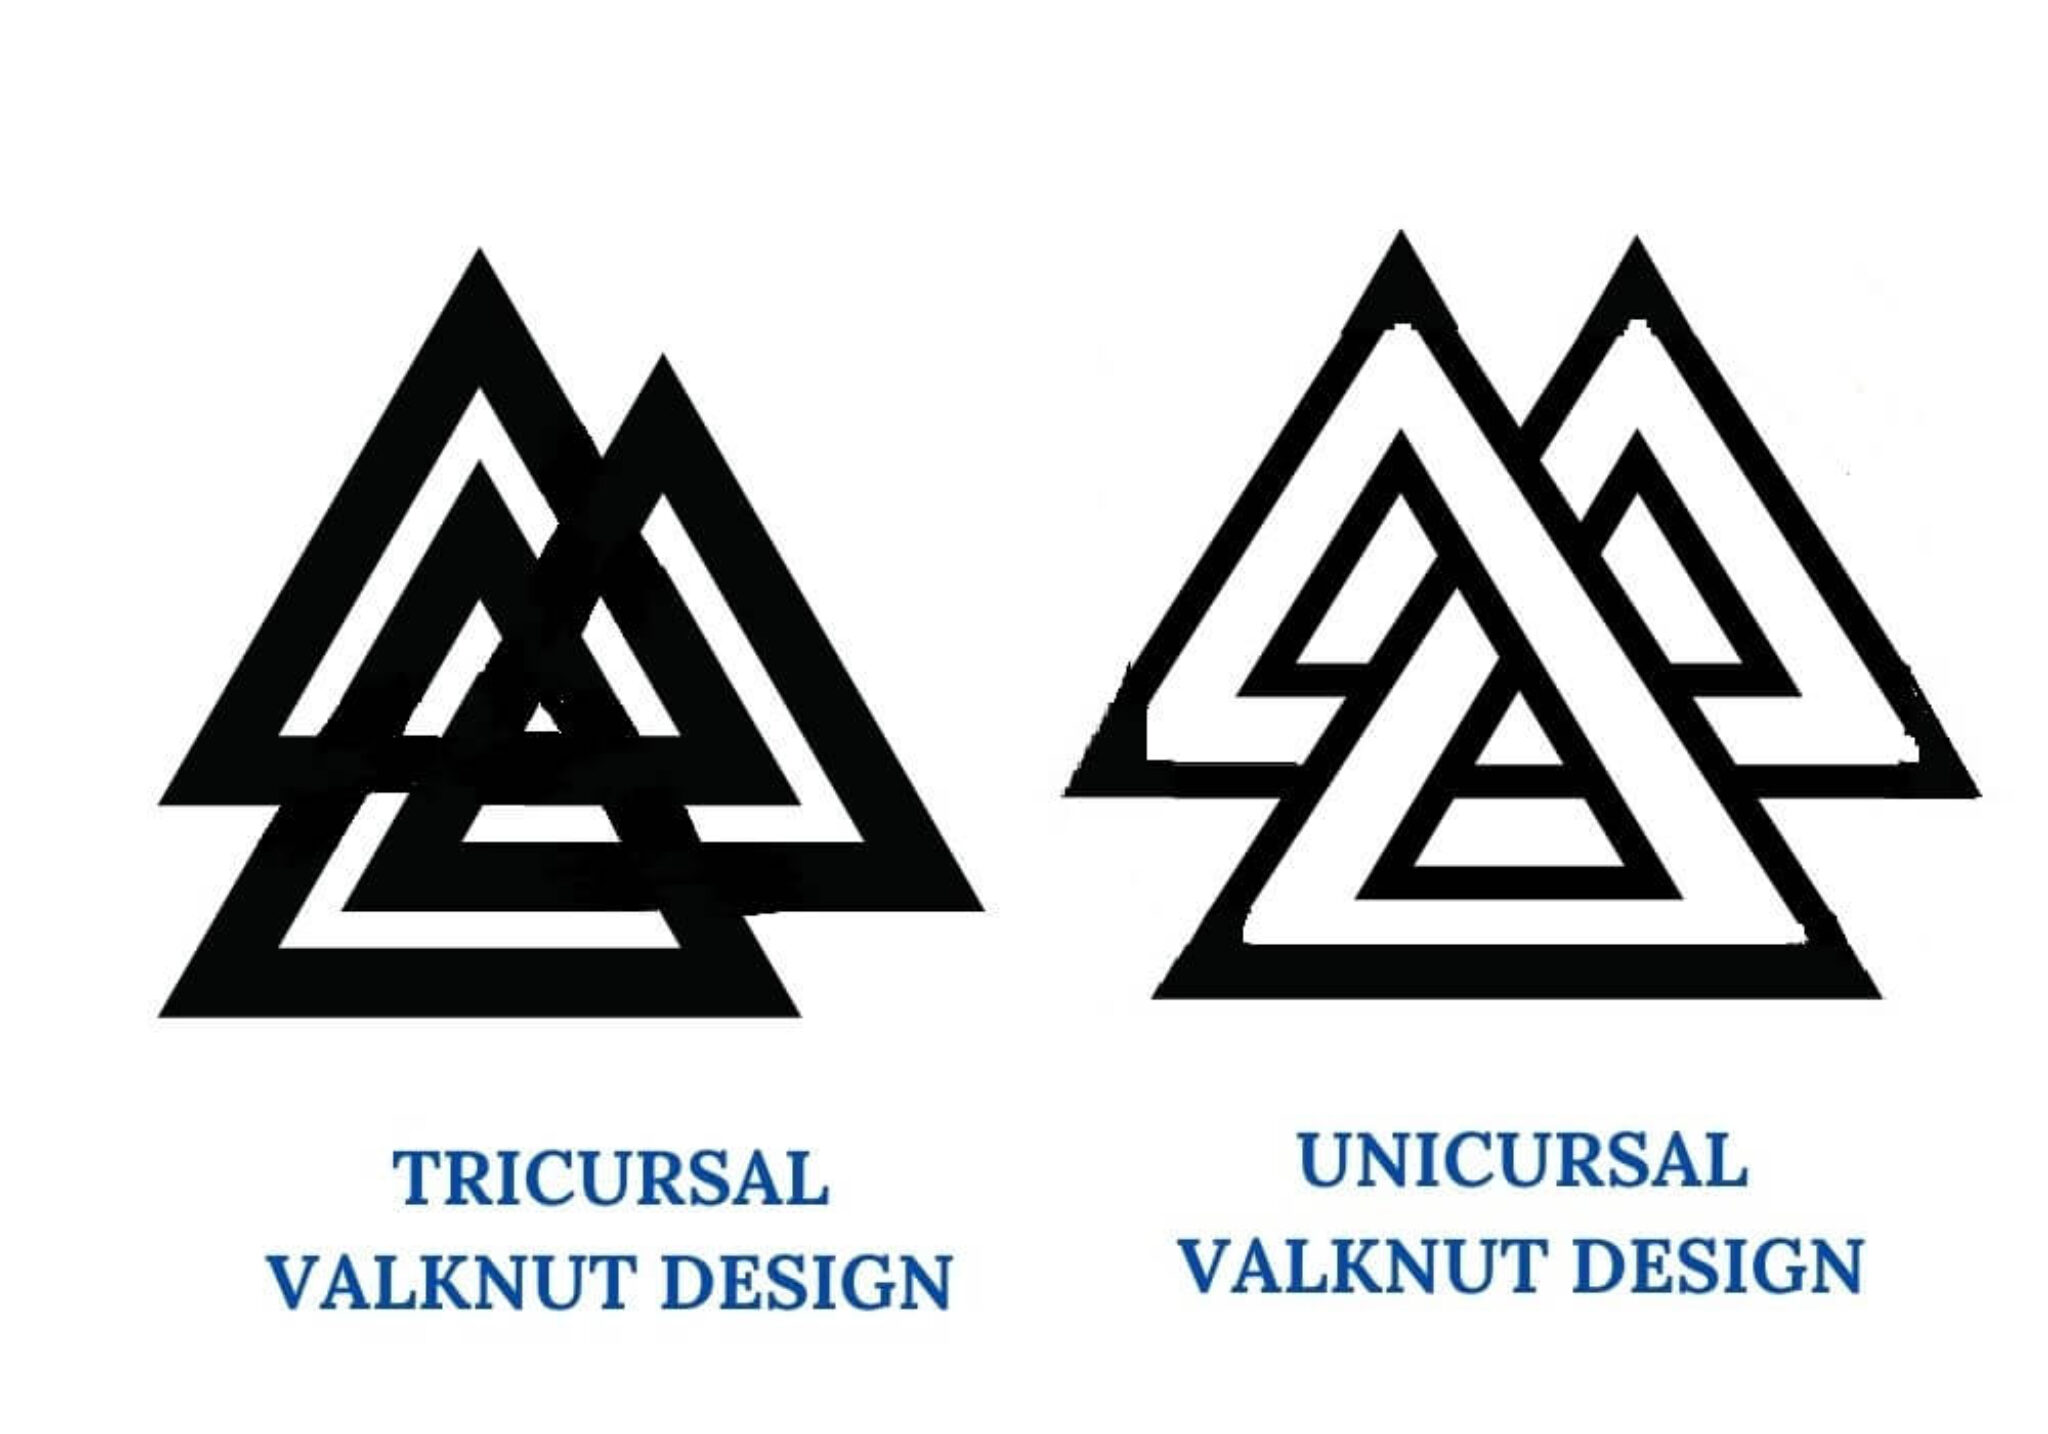 norse valknut meaning